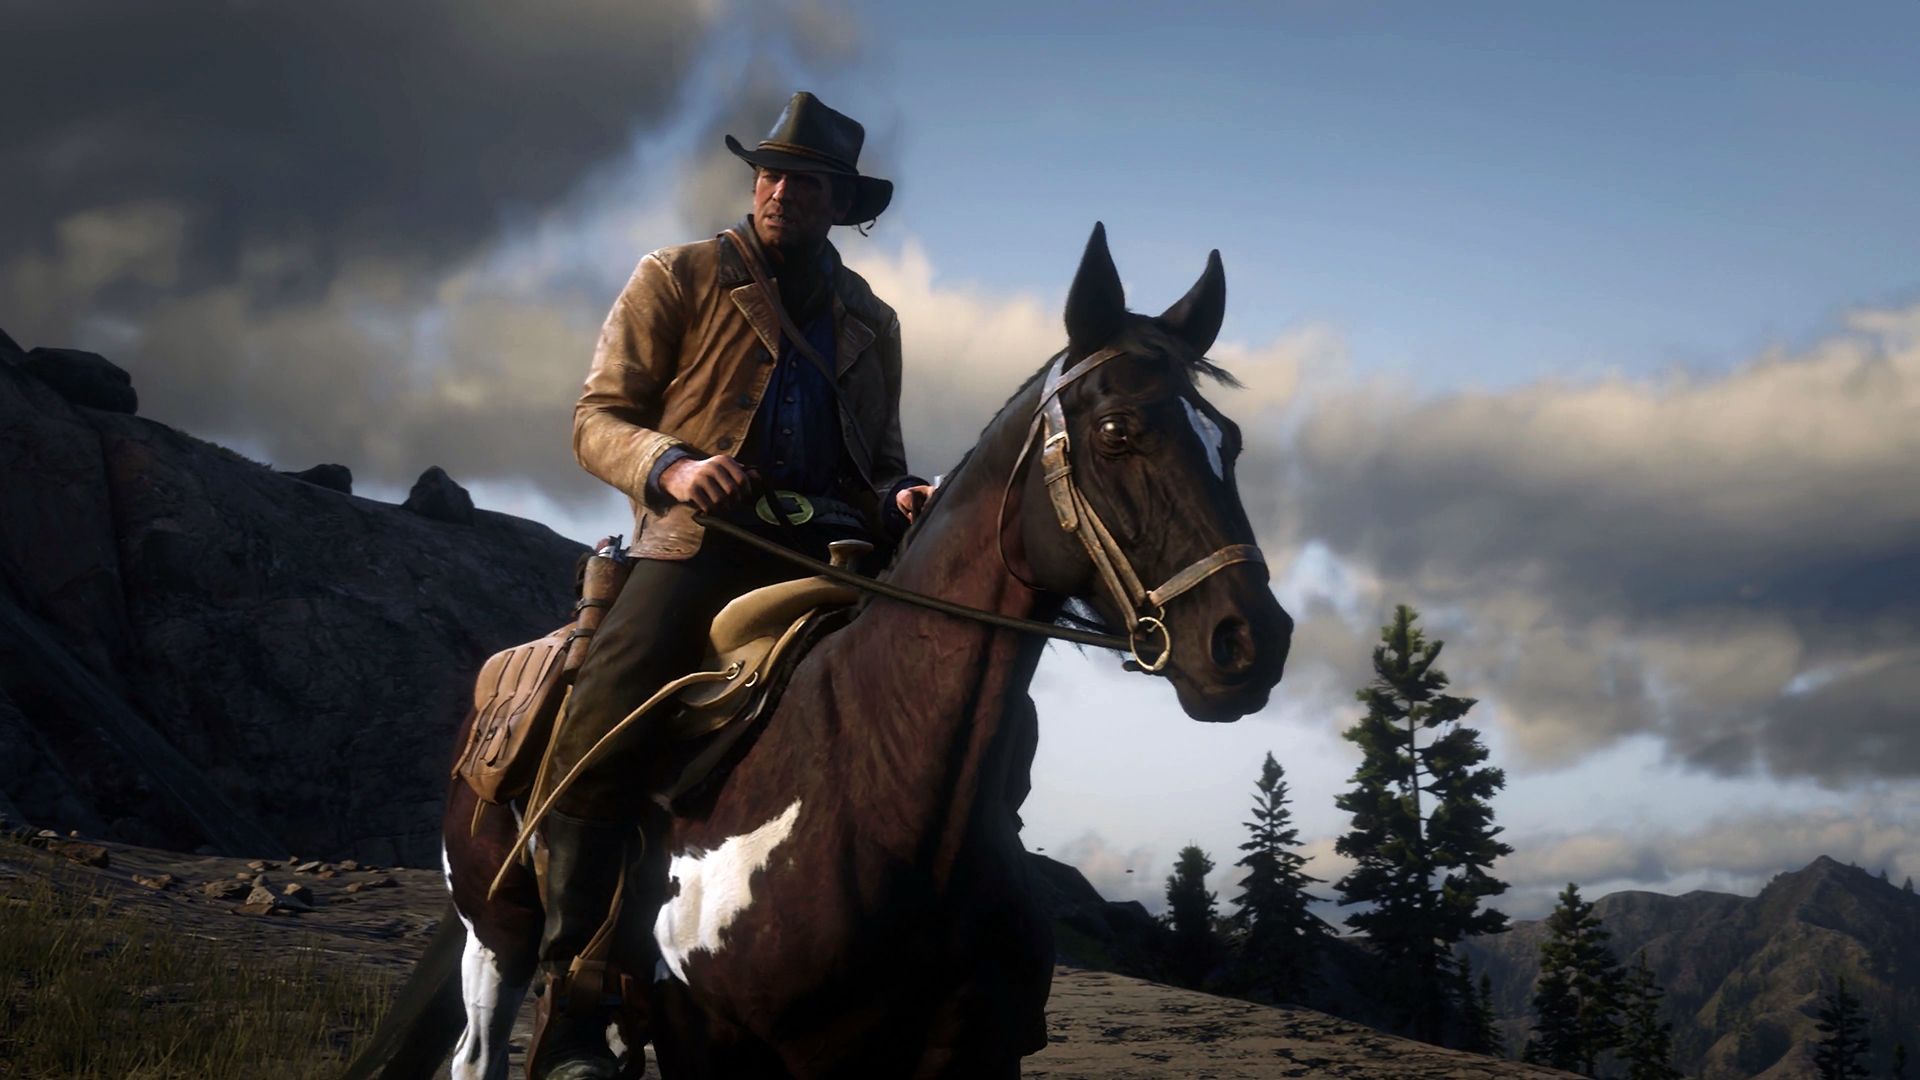 Horse Red Dead Redemption 2 Wallpaper Free Horse Red Dead Redemption 2 Background